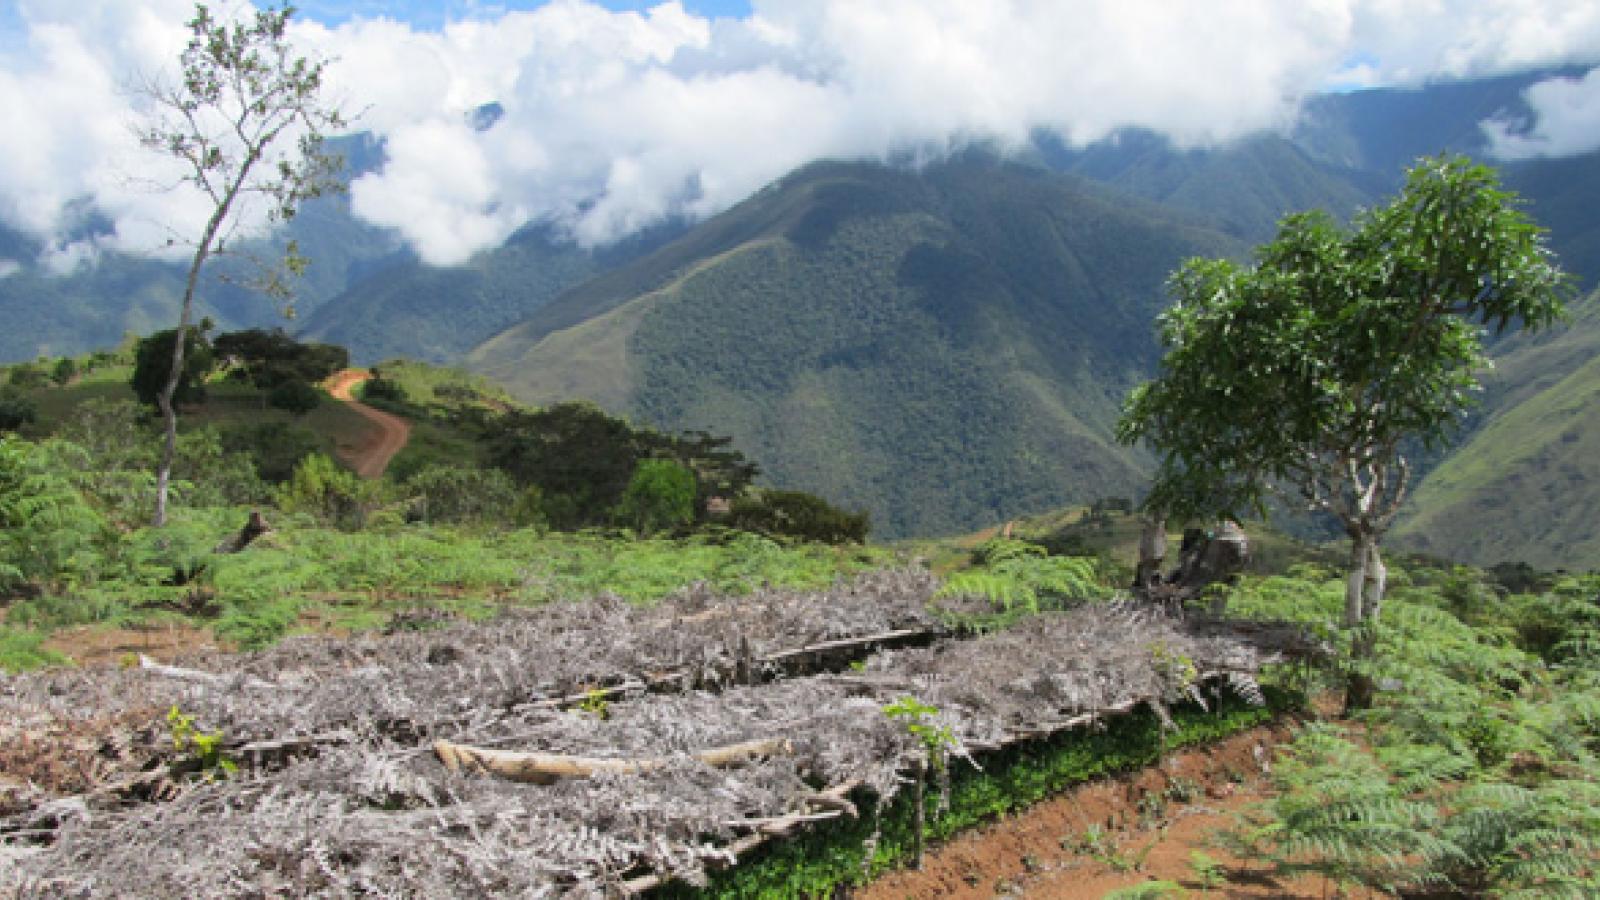 Coca seedlings growing in Yungas, Bolivia by Zoe Pearson